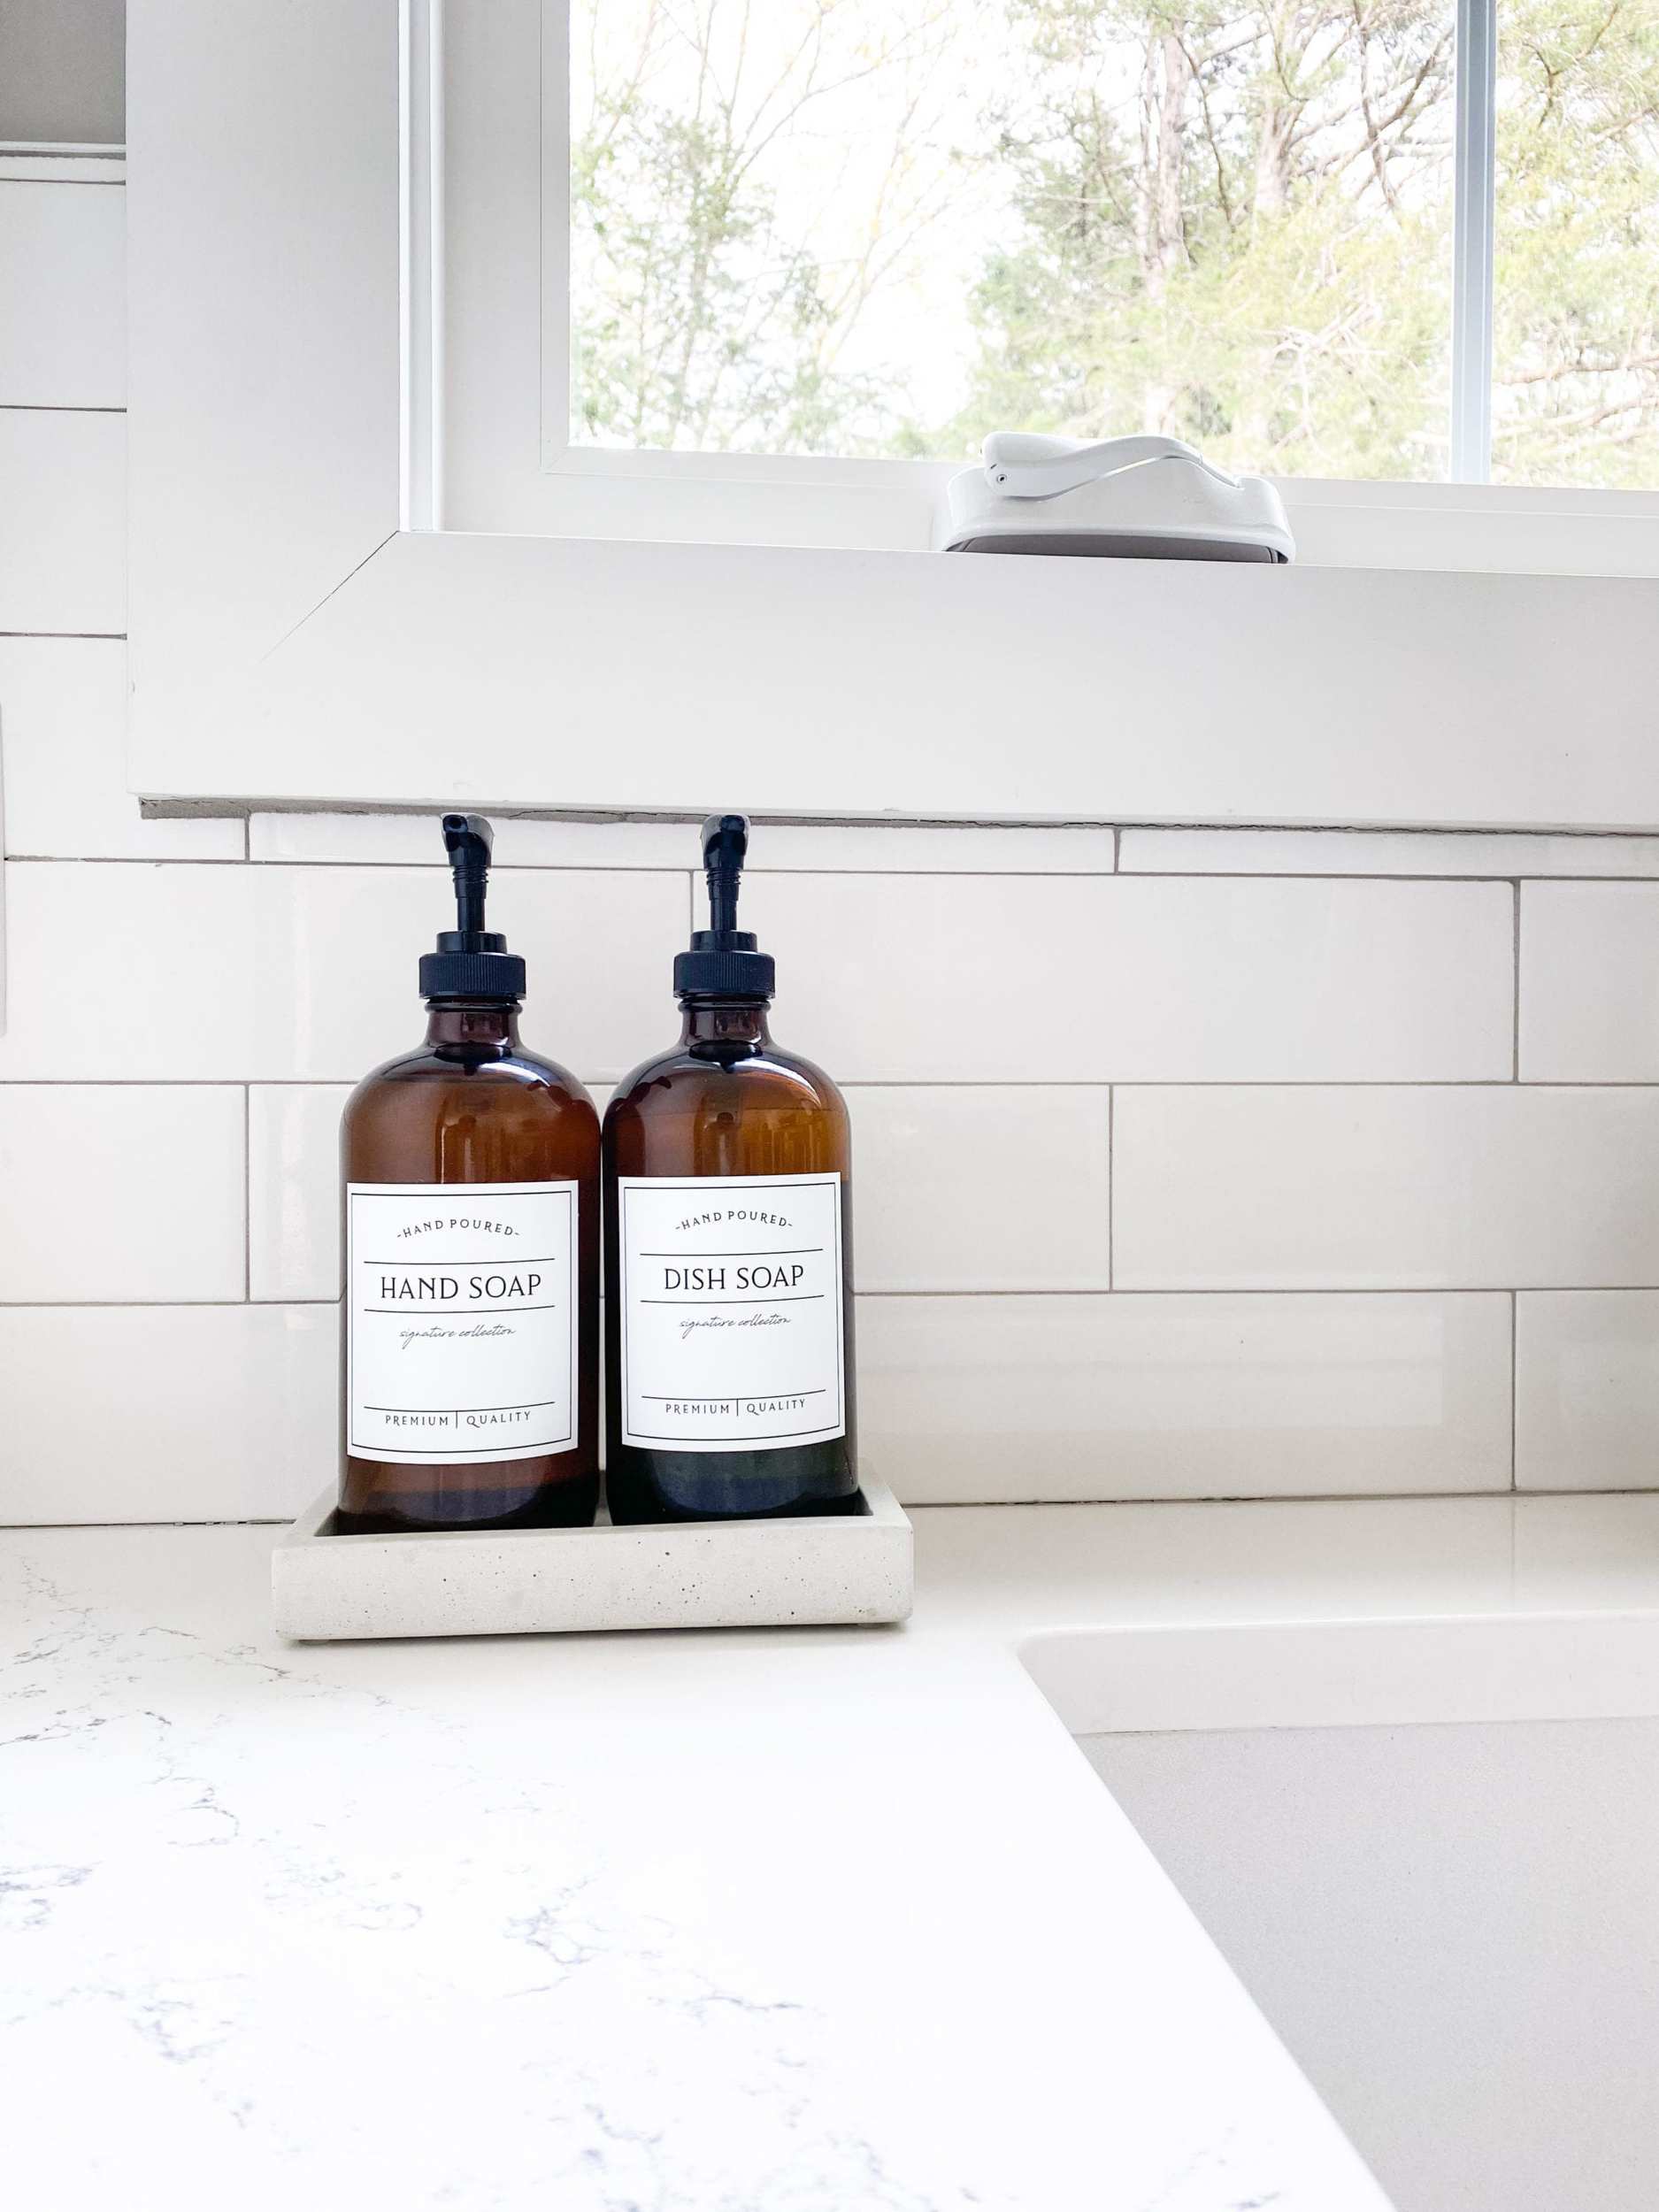 Amber hand and dish soap bottles with black pumps in a soap tray with a white subway tile backsplash